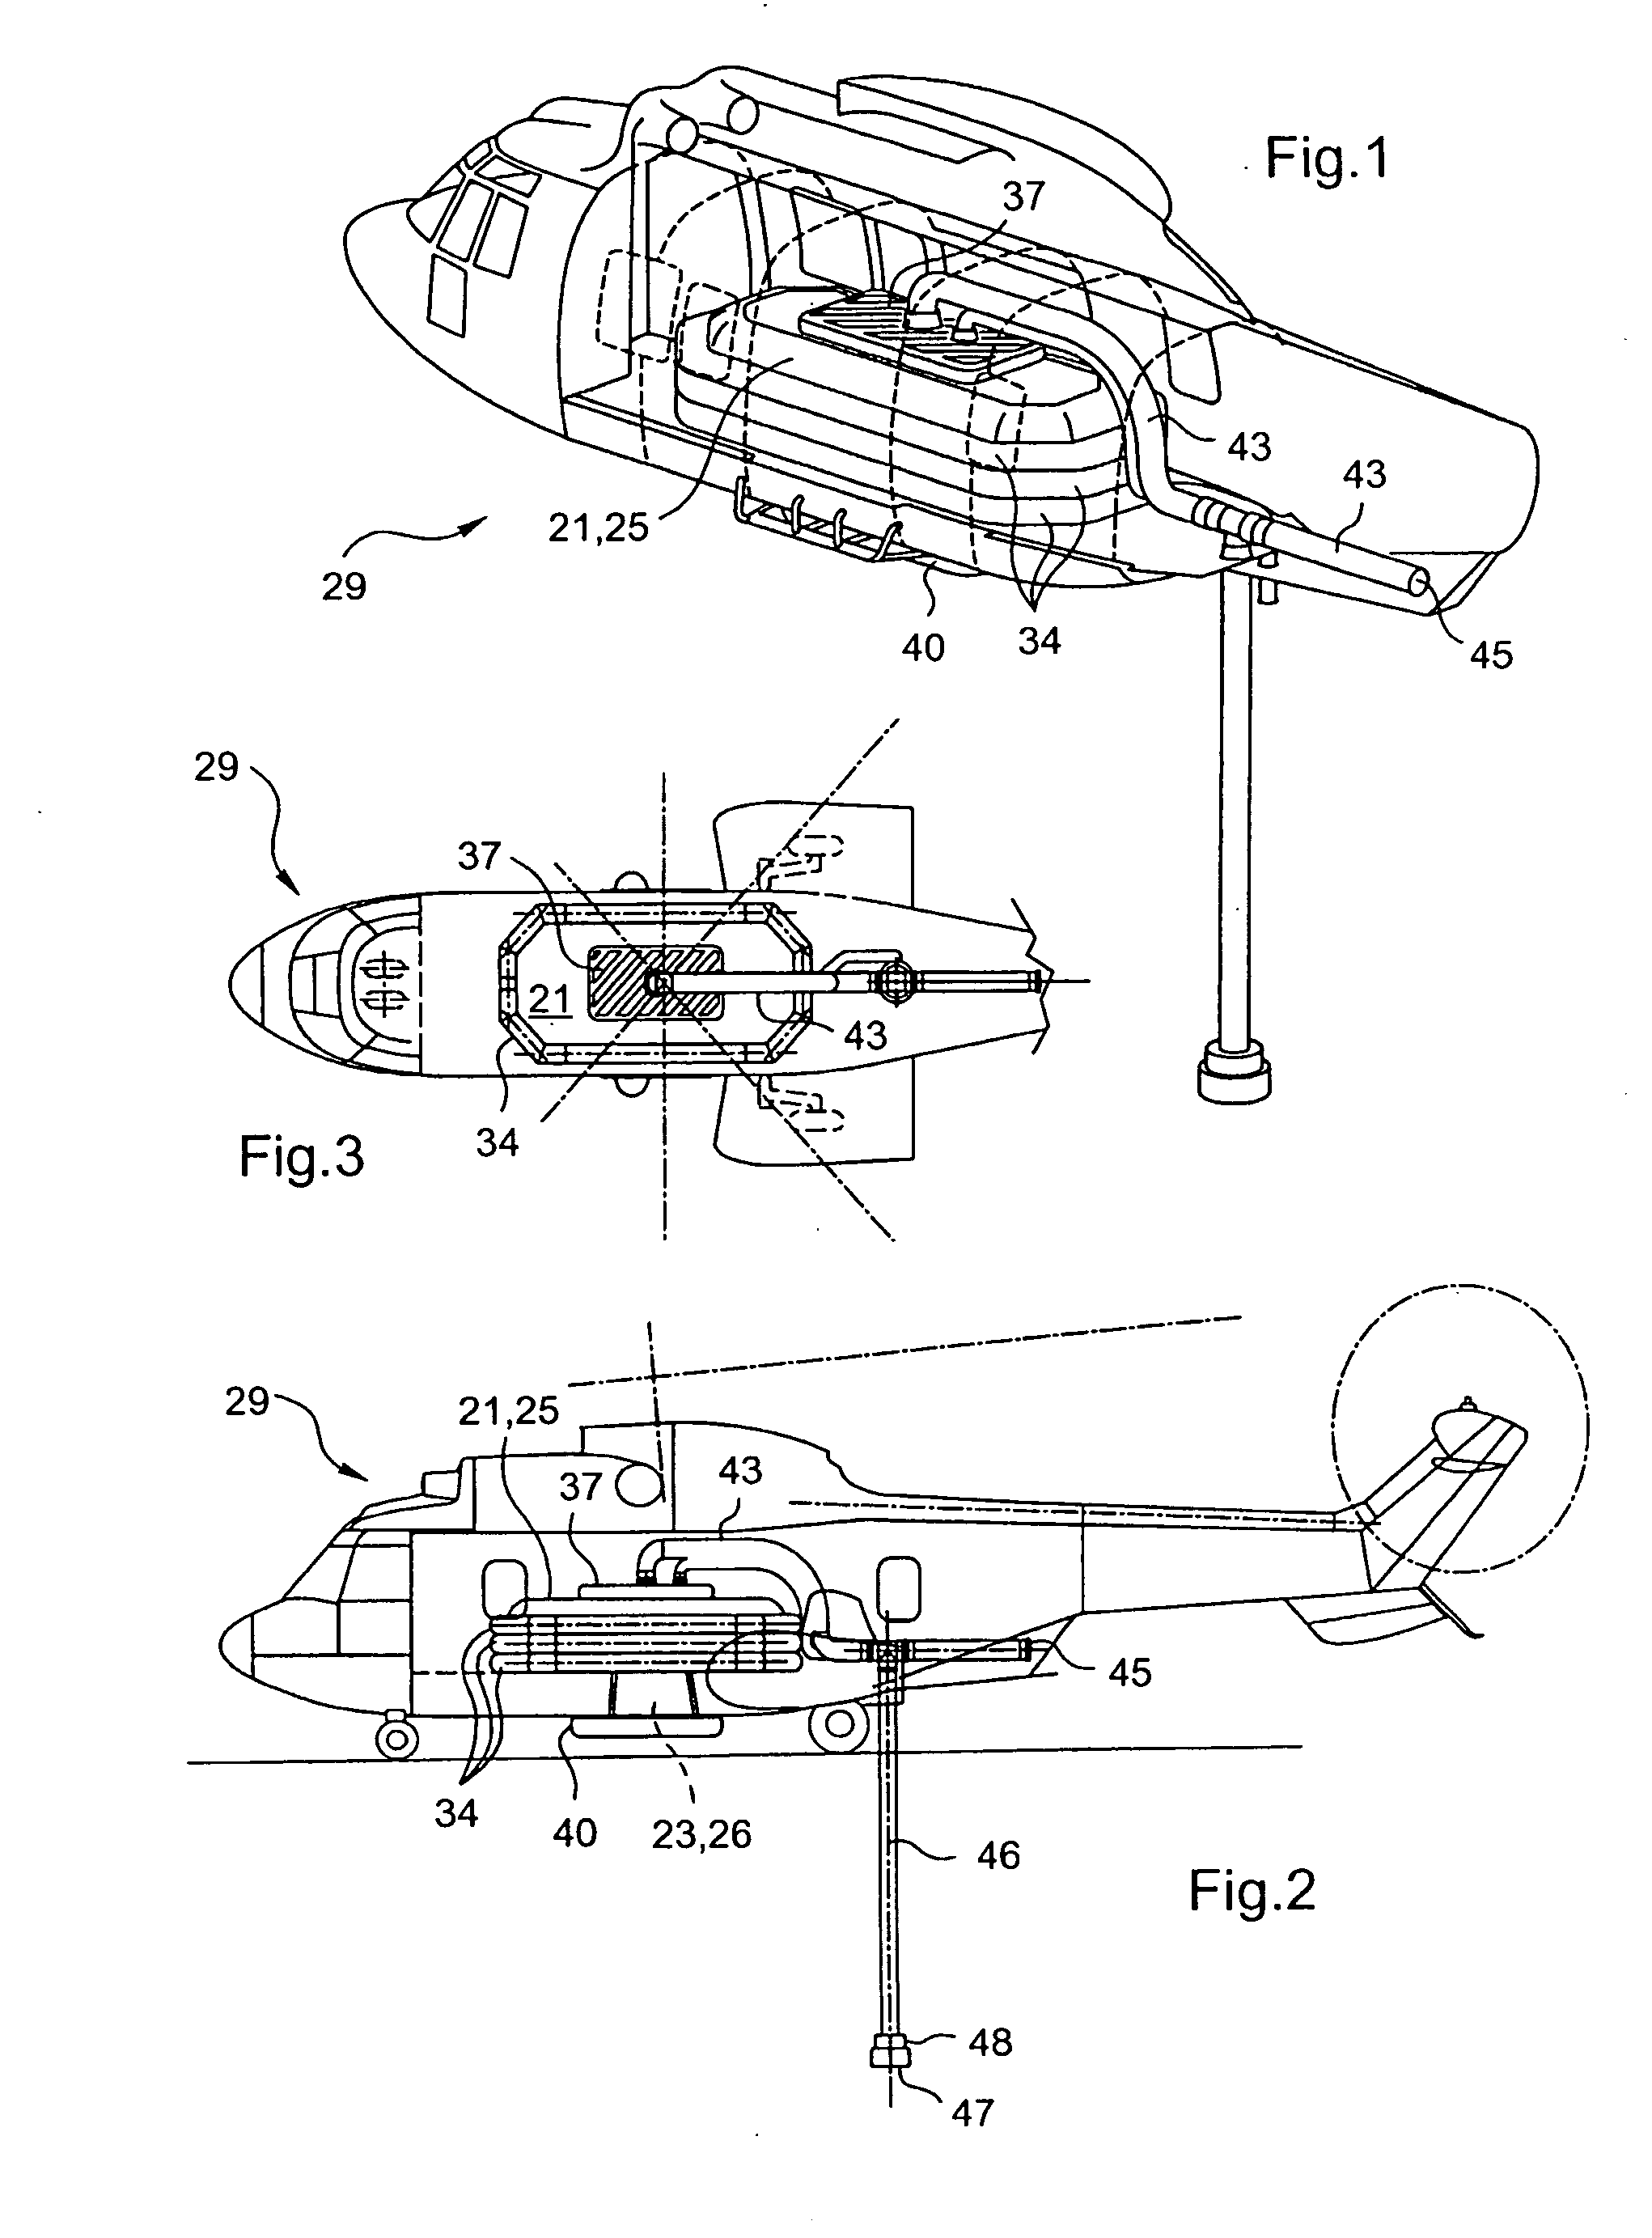 Aerially transportable tank for storing a composition for discharging in flight